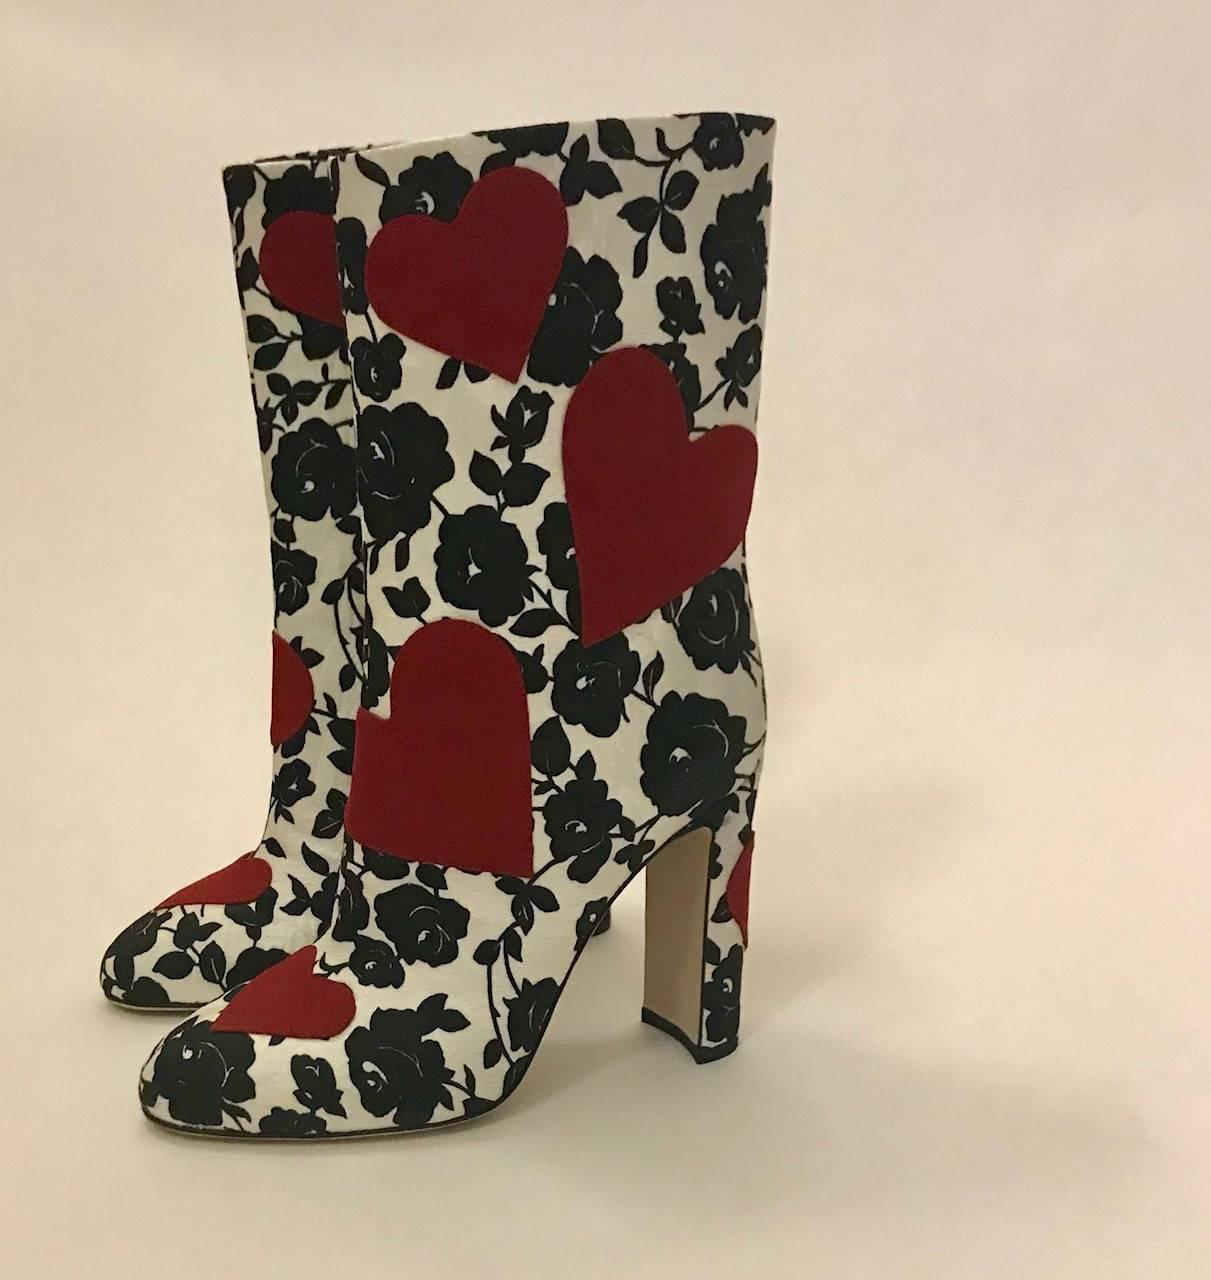 Dolce & Gabbana black and white rose print satin jacquard boots with red hearts. Covered heel, approximately 4 1/4 inches. Boot part is an additional 7 1/2